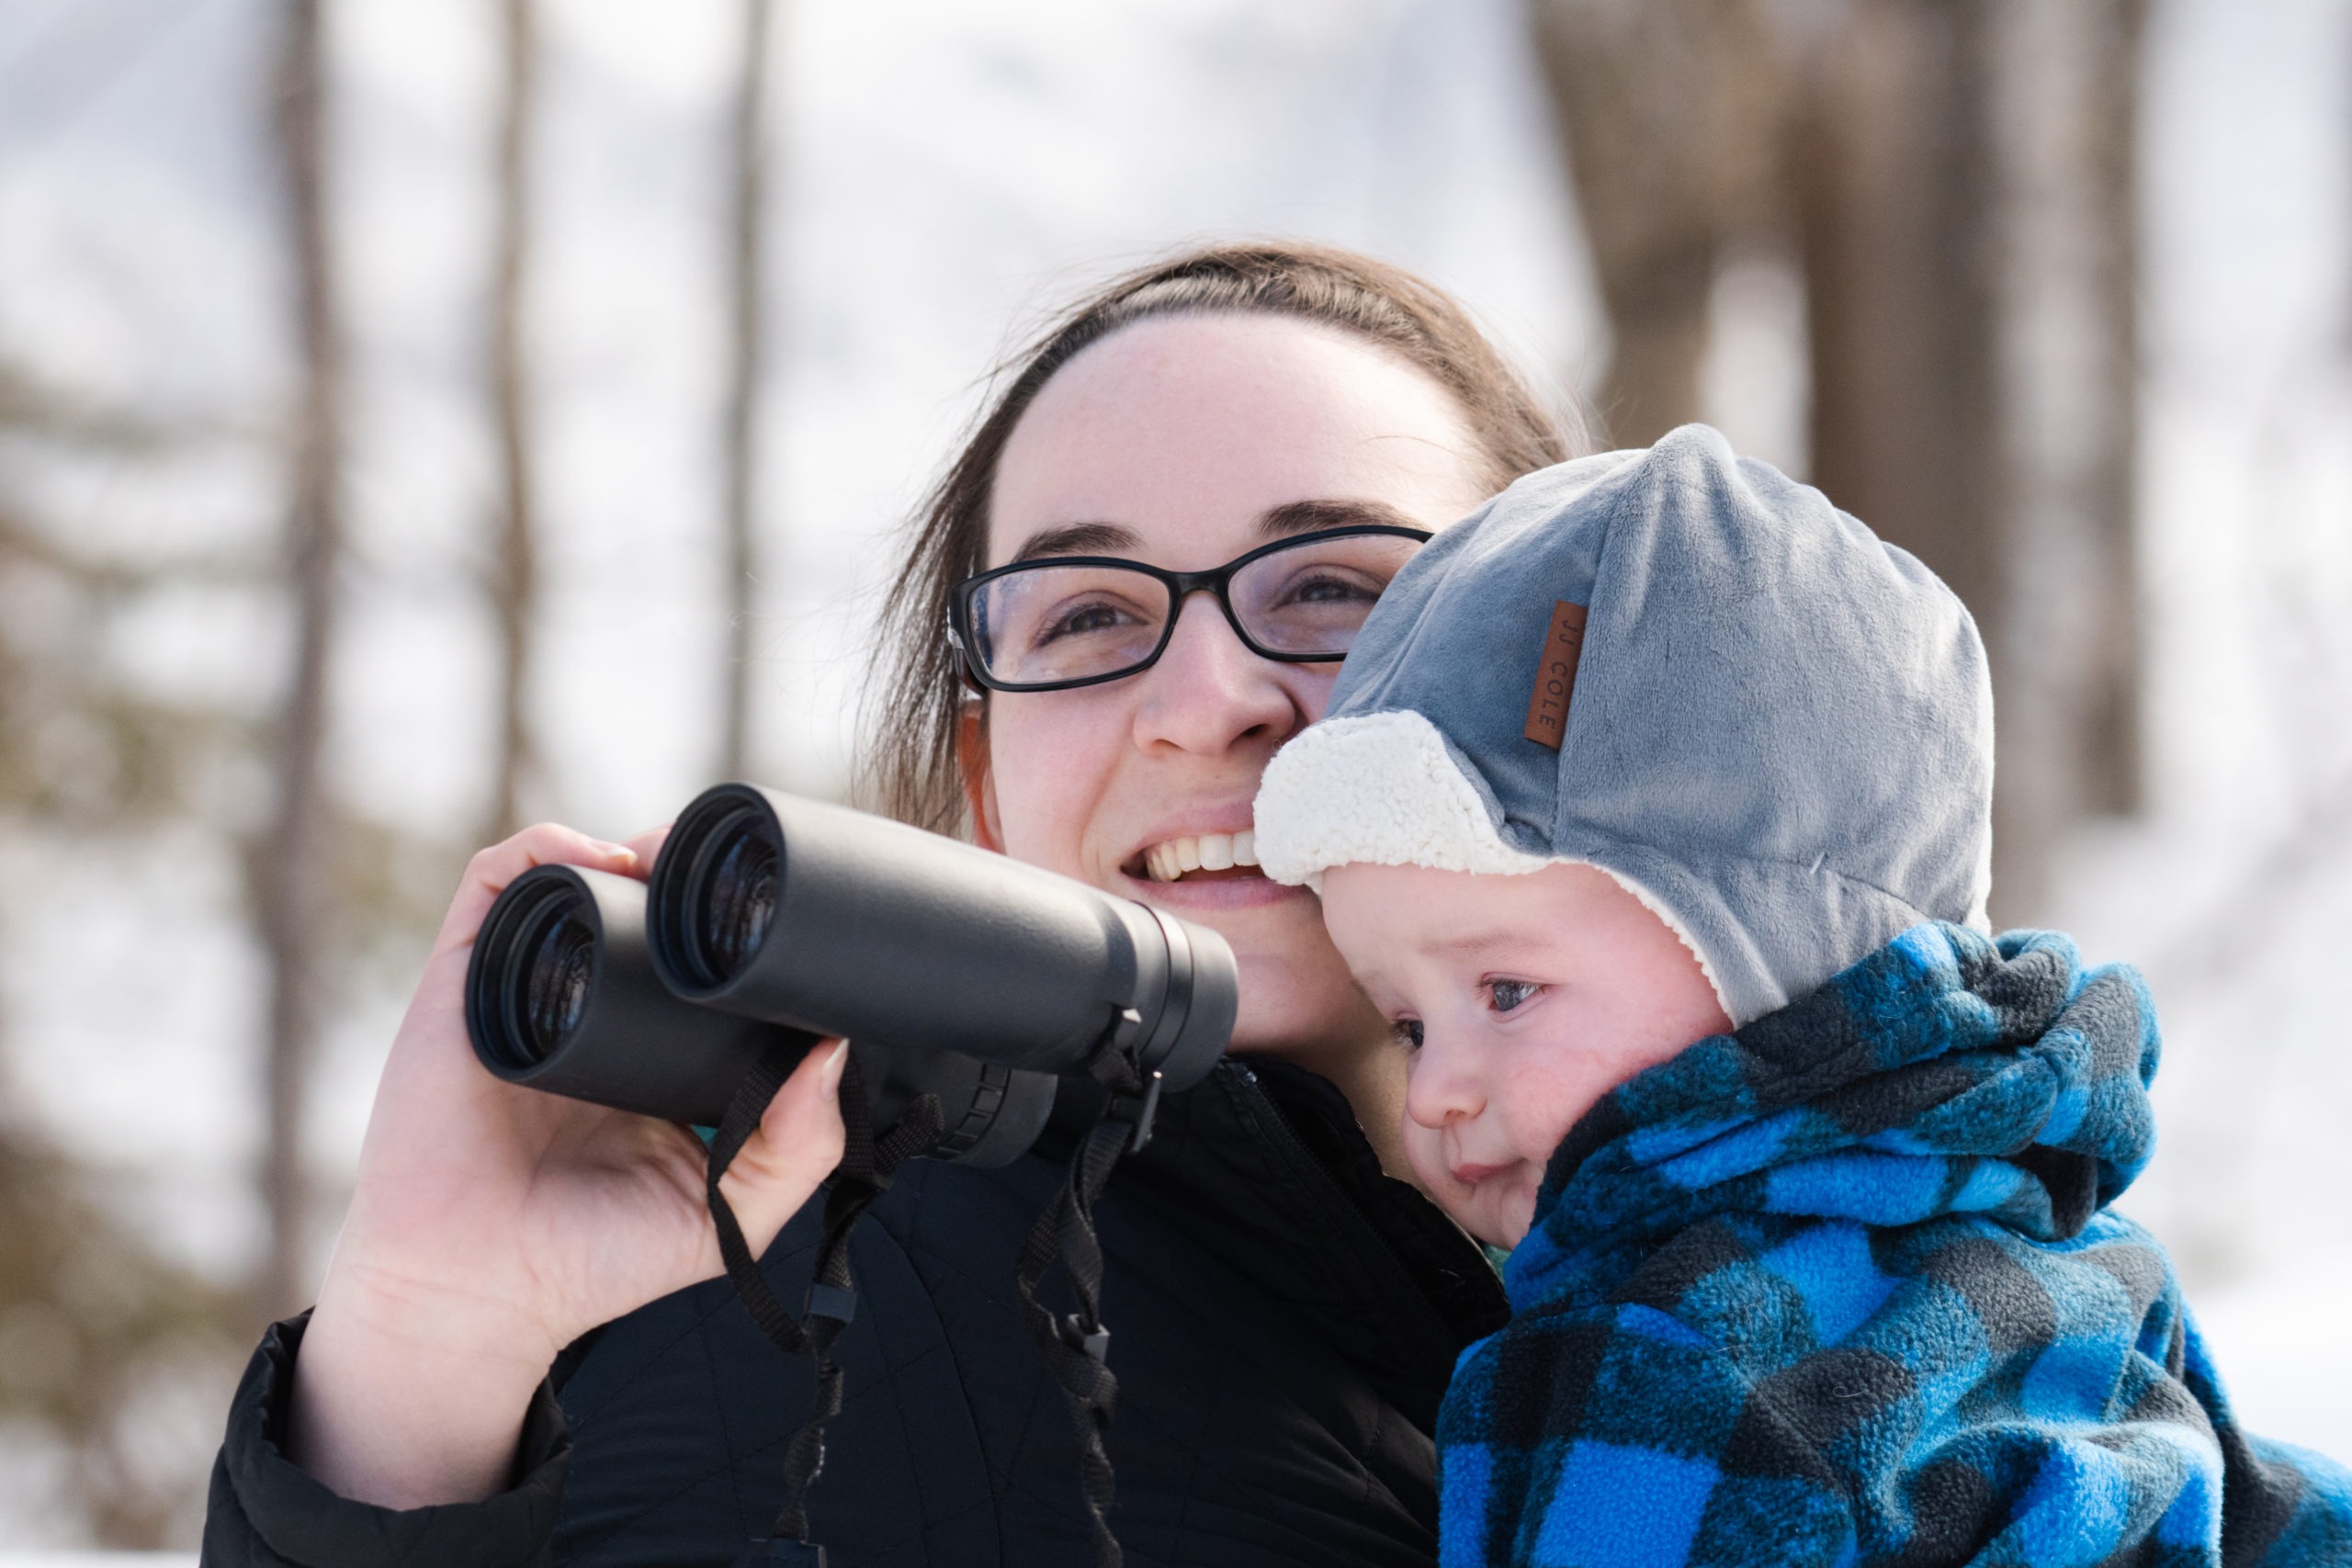 A woman and young child watch birds with binoculars.